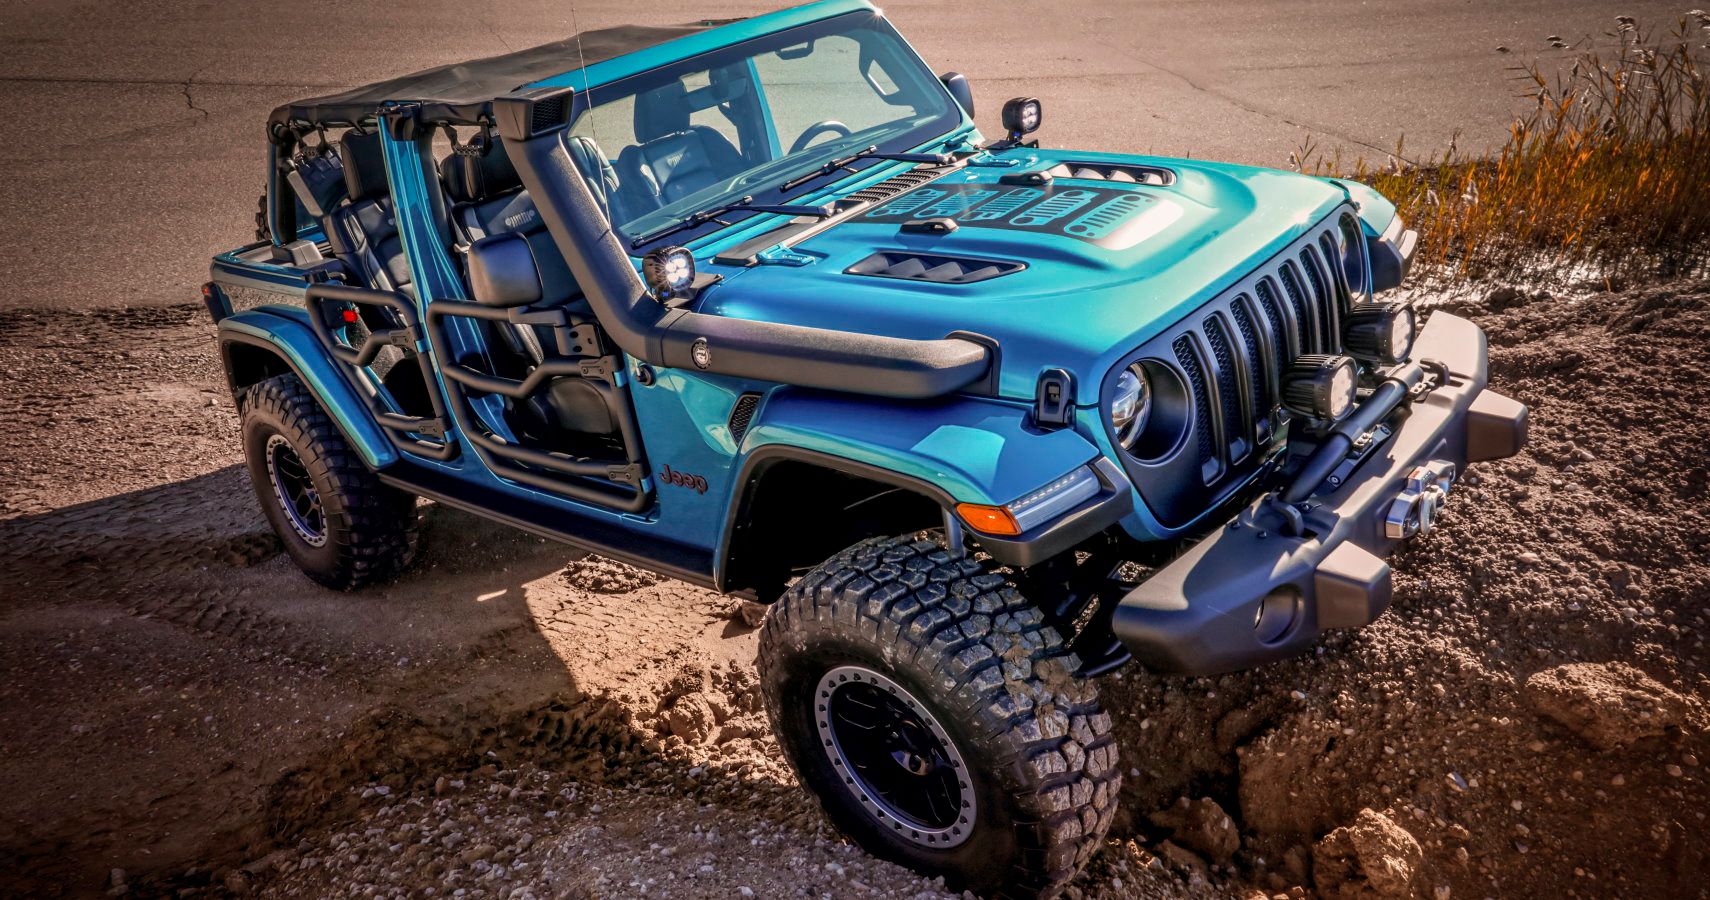 Check Out This Wild Jeep Wrangler Concept Heading To SEMA